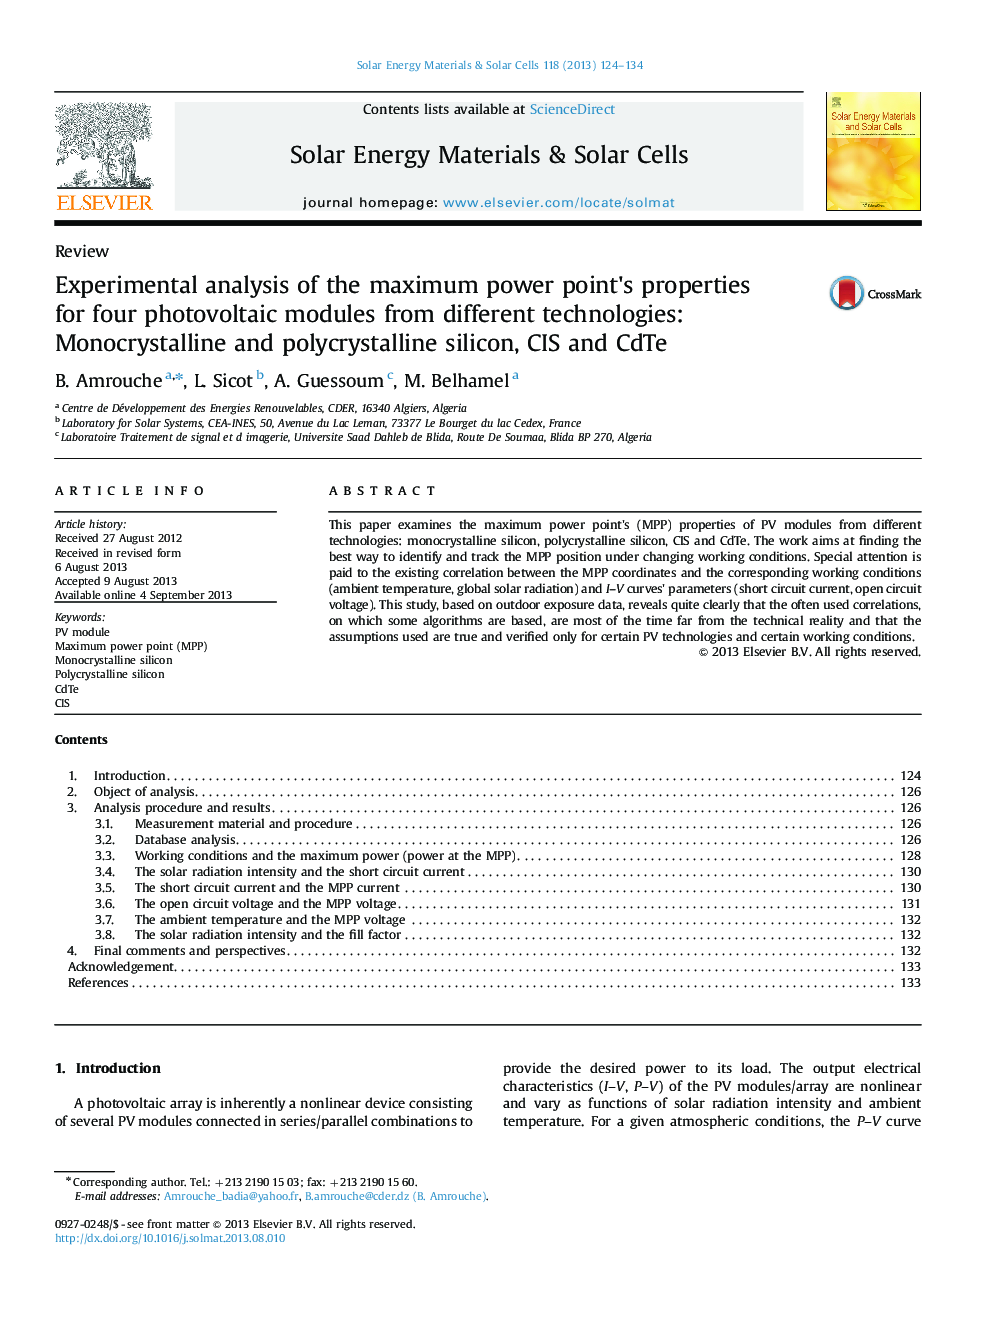 Experimental analysis of the maximum power point's properties for four photovoltaic modules from different technologies: Monocrystalline and polycrystalline silicon, CIS and CdTe